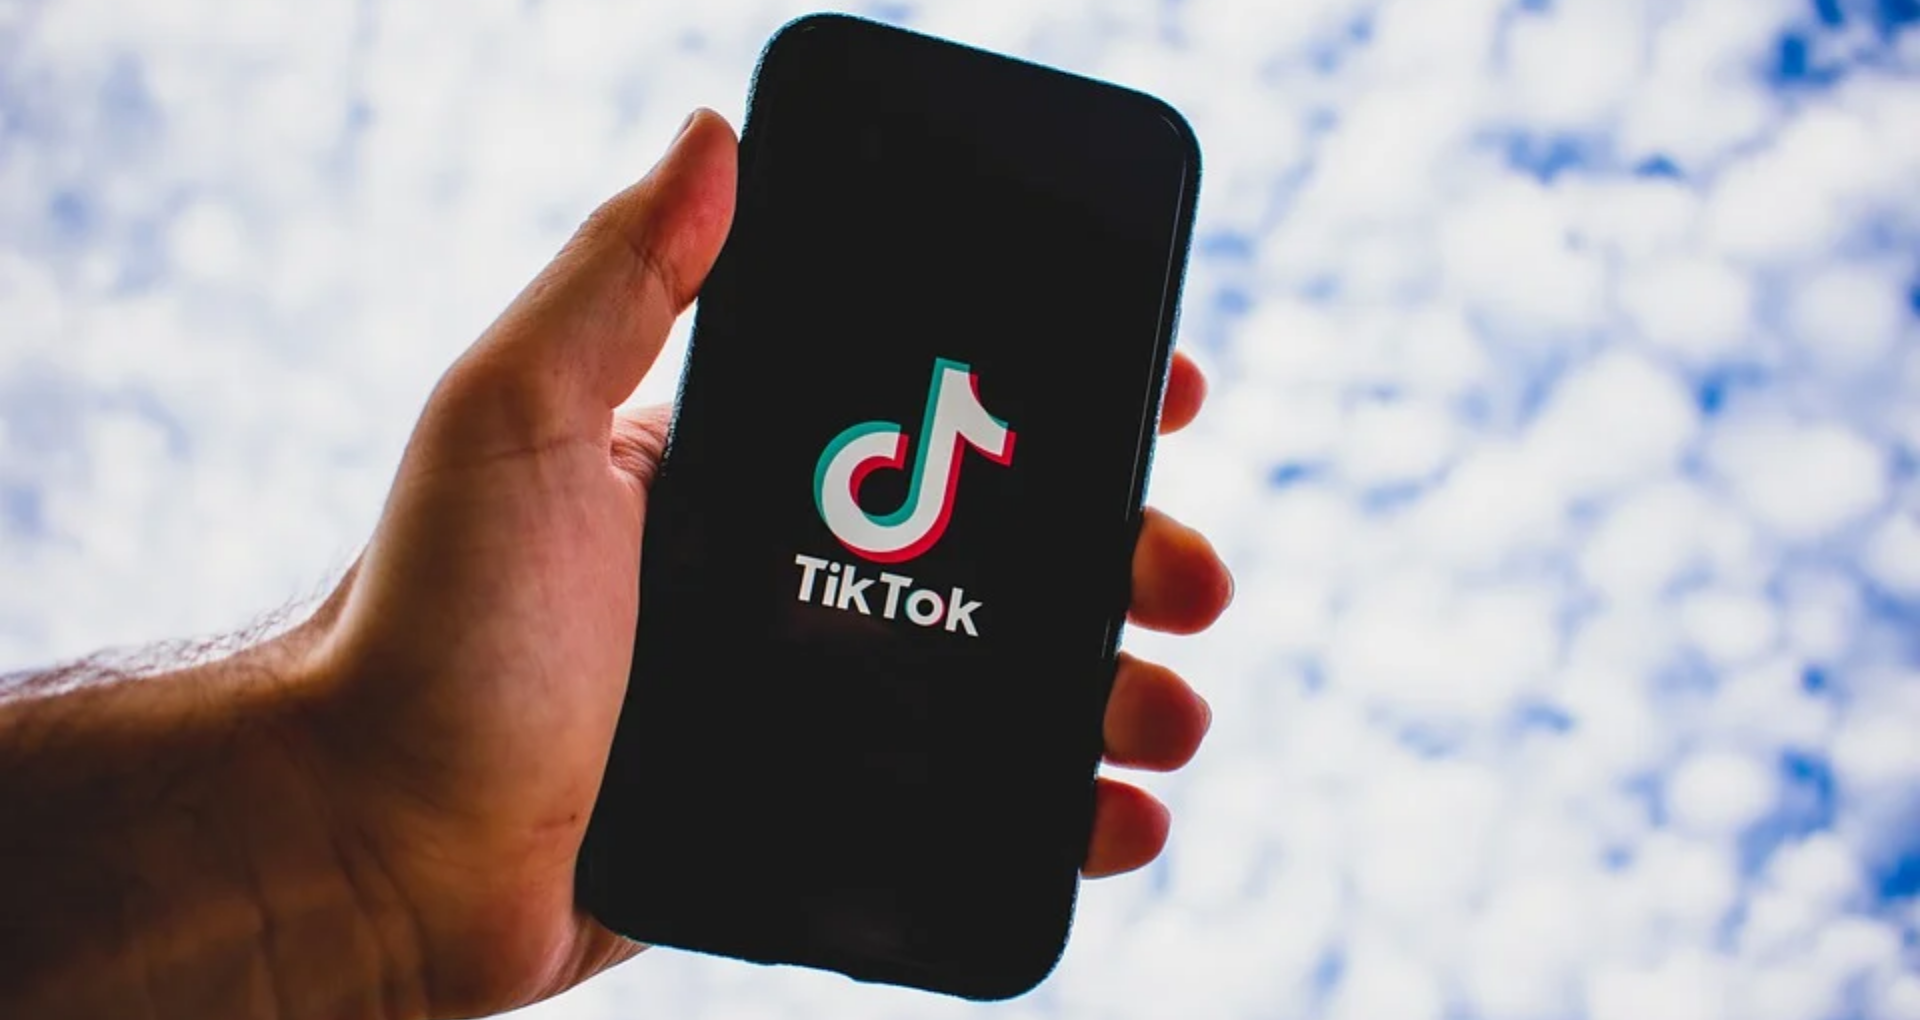 Microsoft in Talks to buy TikTok, deal Expected by Sept 15